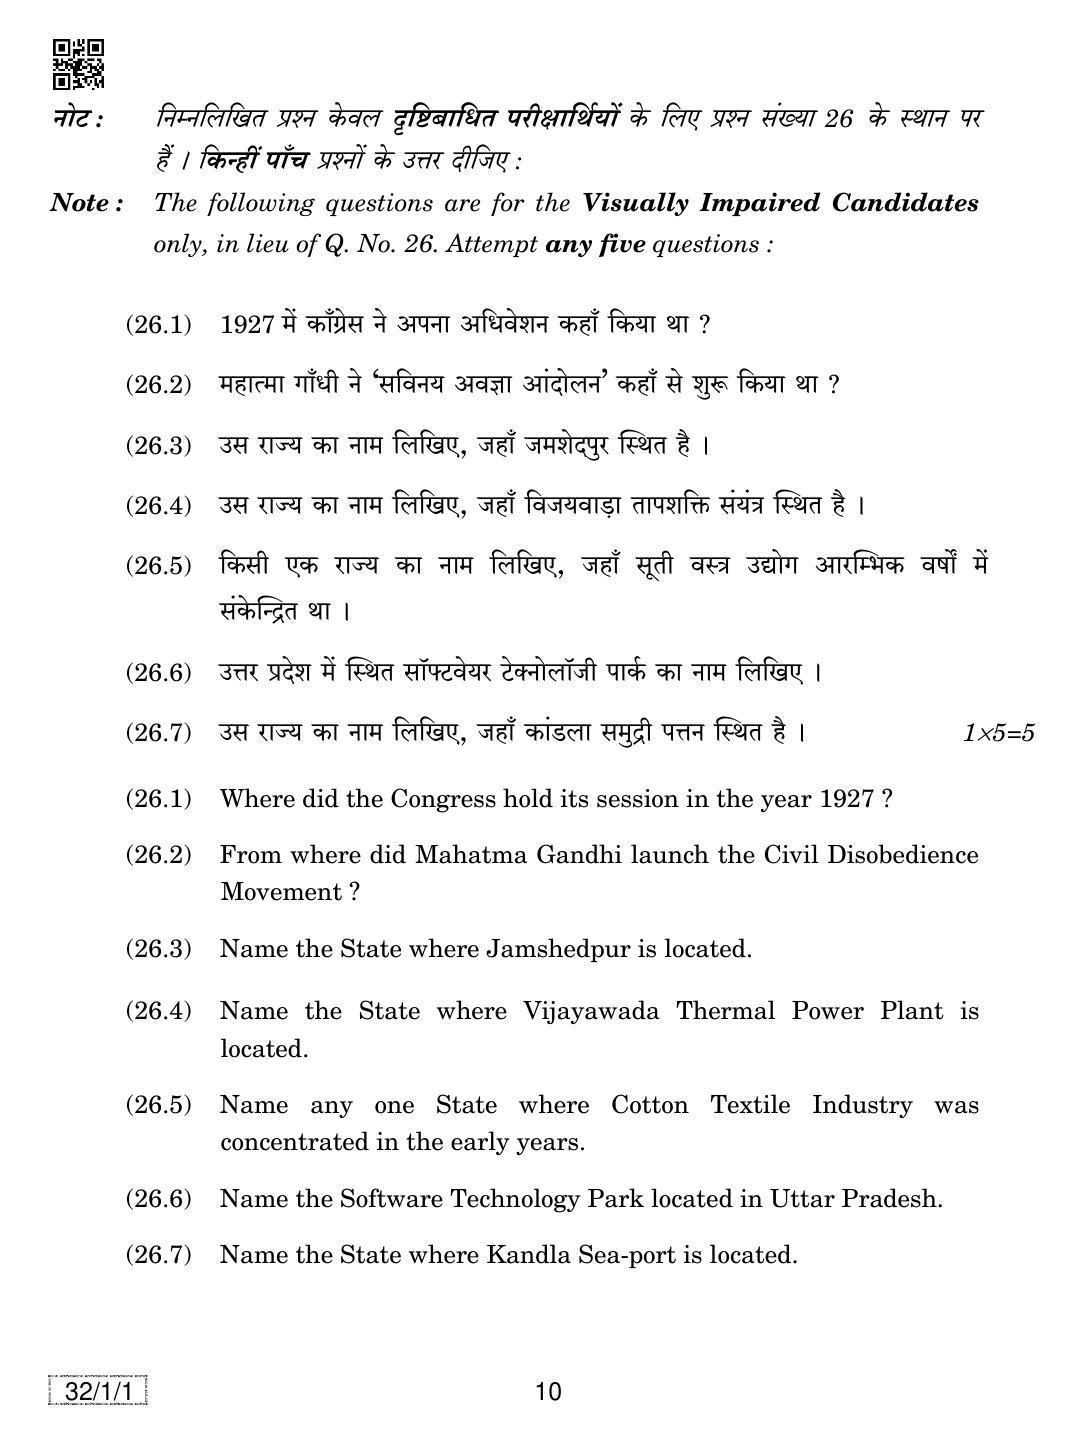 CBSE Class 10 32-1-1 SOCIAL SCIENCE 2019 Compartment Question Paper - Page 10